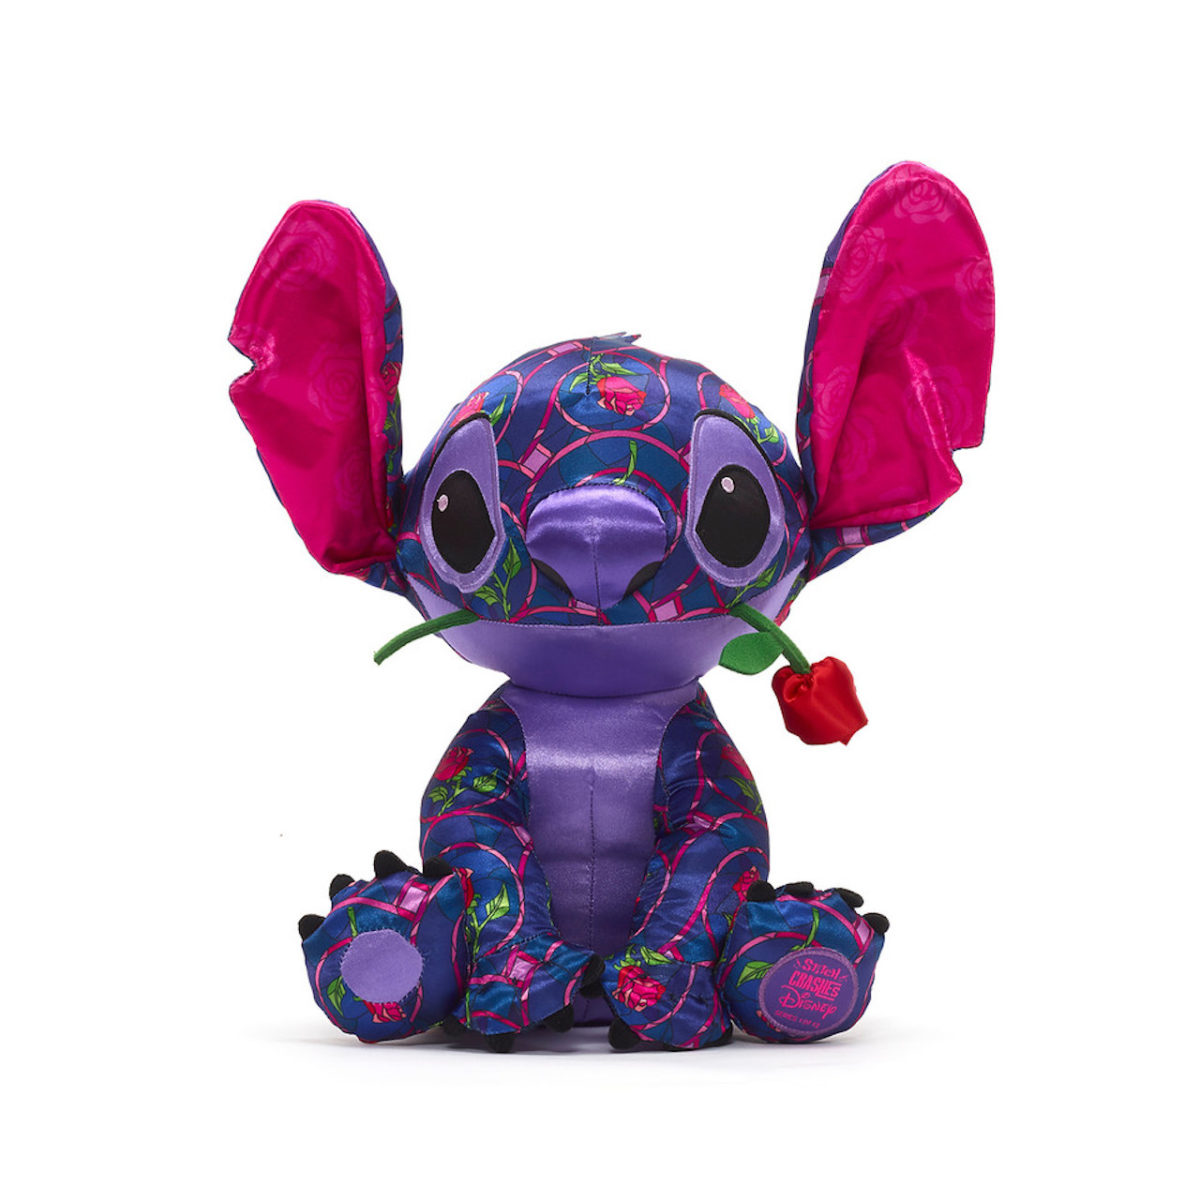 stitch-crashes-disney-beauty-and-the-beast-1-4572785